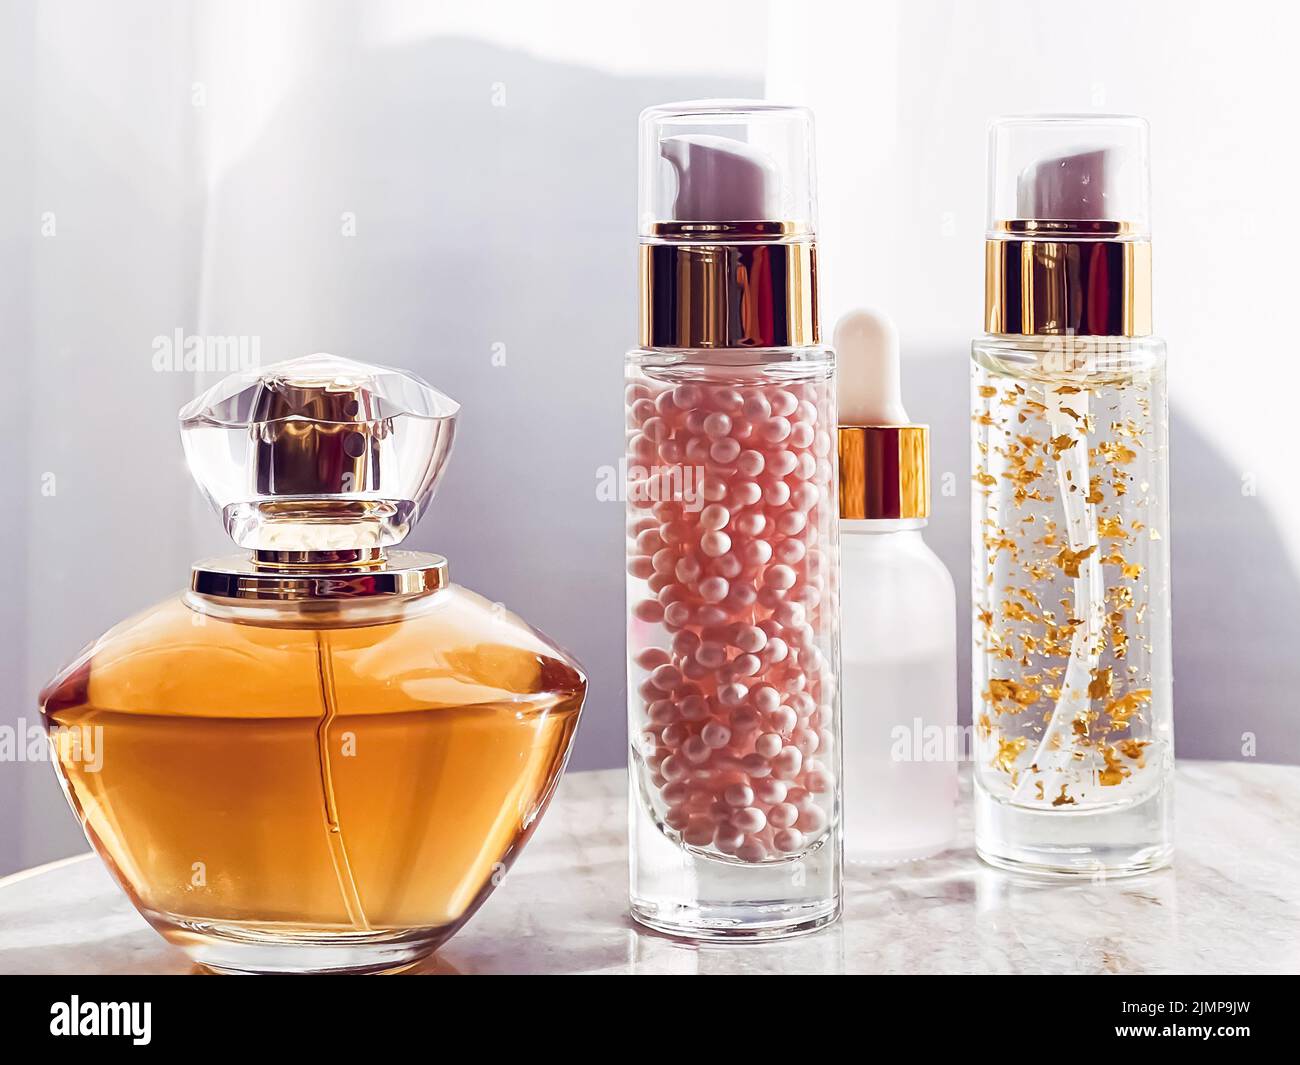 Skincare and make-up cosmetics, golden serum emulsion bottles and perfume, beauty product Stock Photo